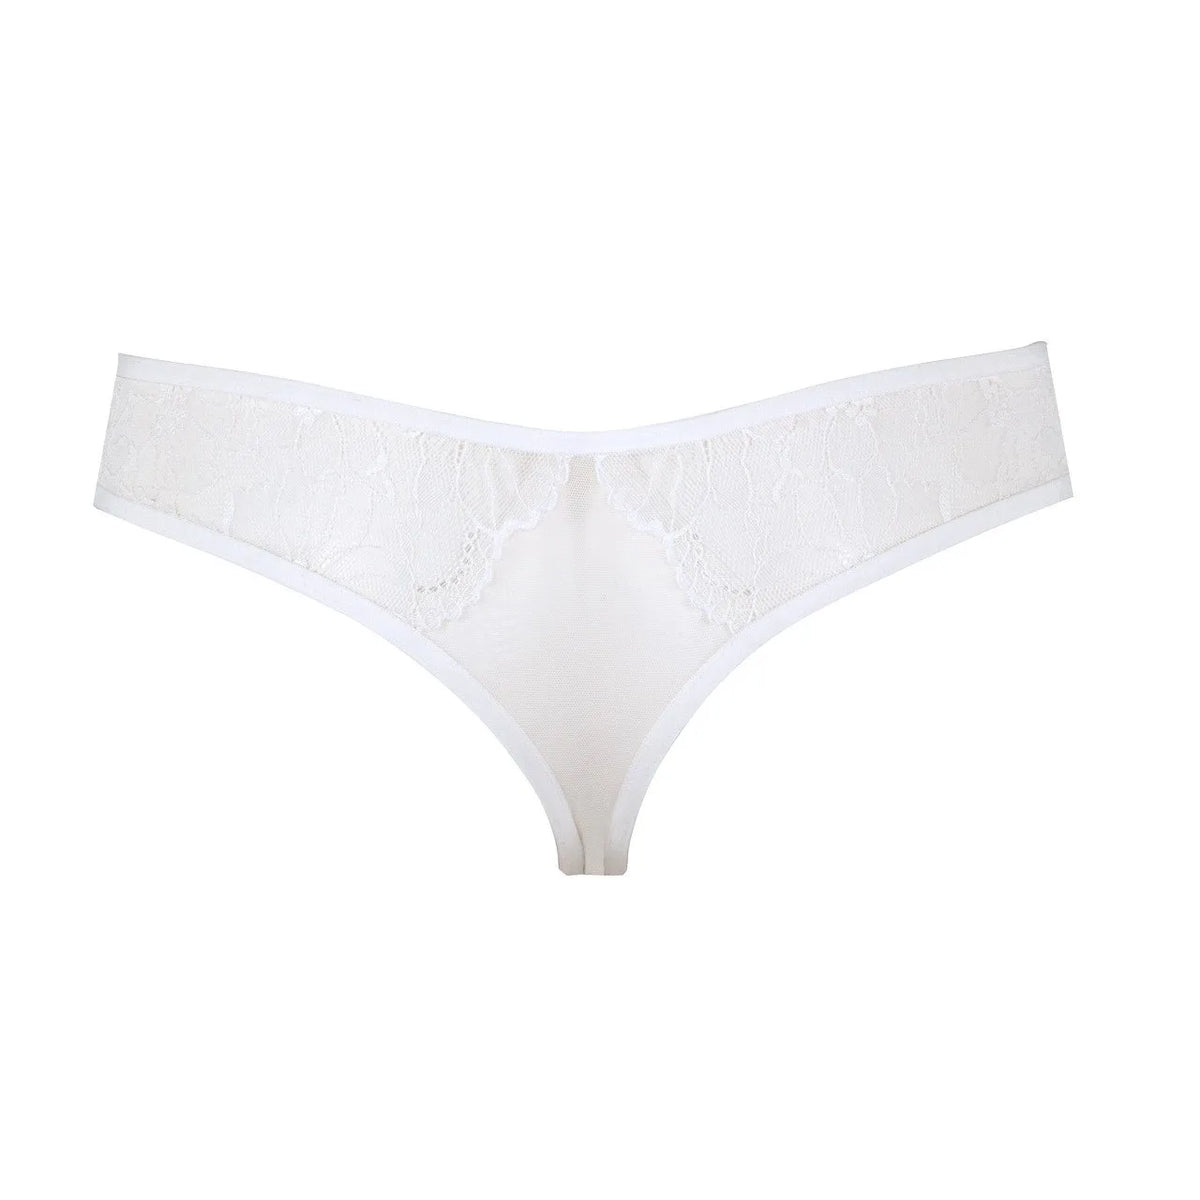 EMMERSON Mesh Thong from Bluebella at Belle Lacet Lingerie.